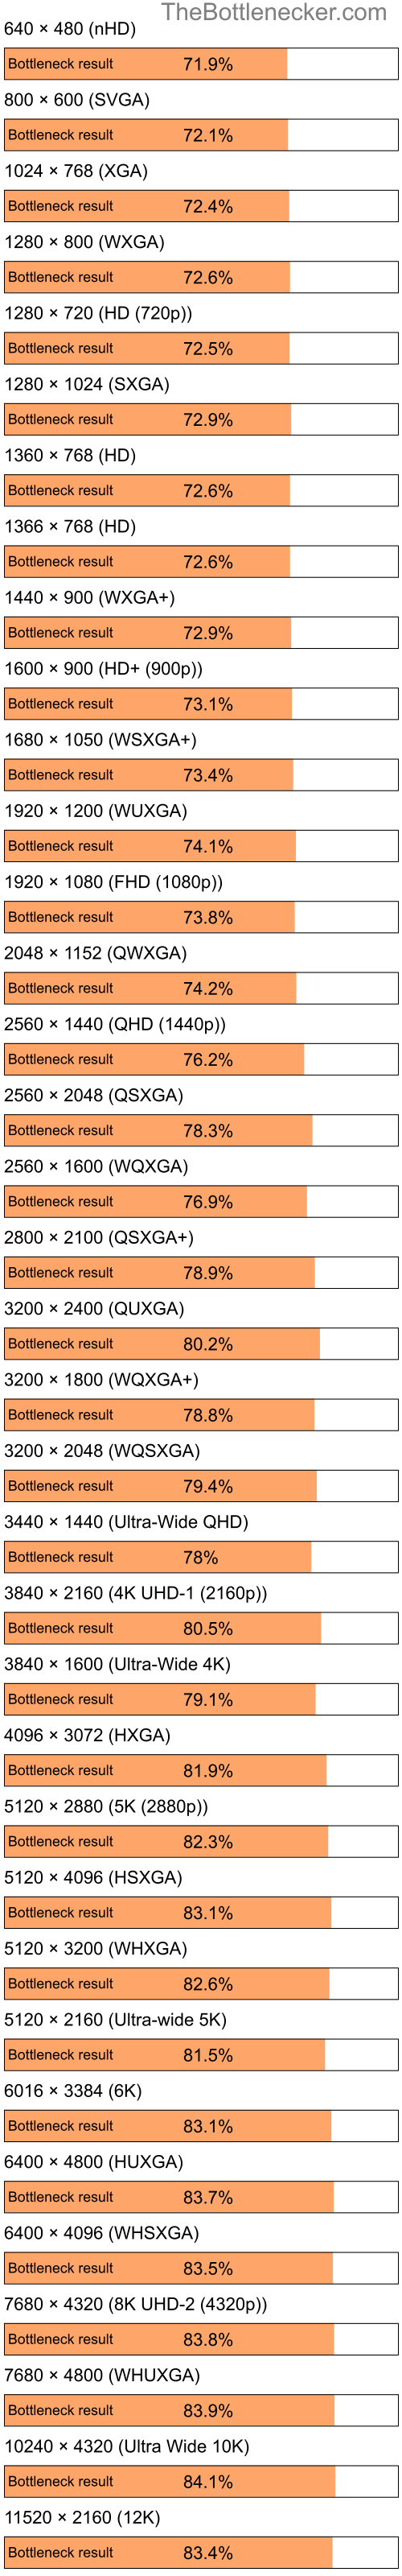 Bottleneck results by resolution for Intel Pentium 4 and NVIDIA GeForce 7100 GS in General Tasks